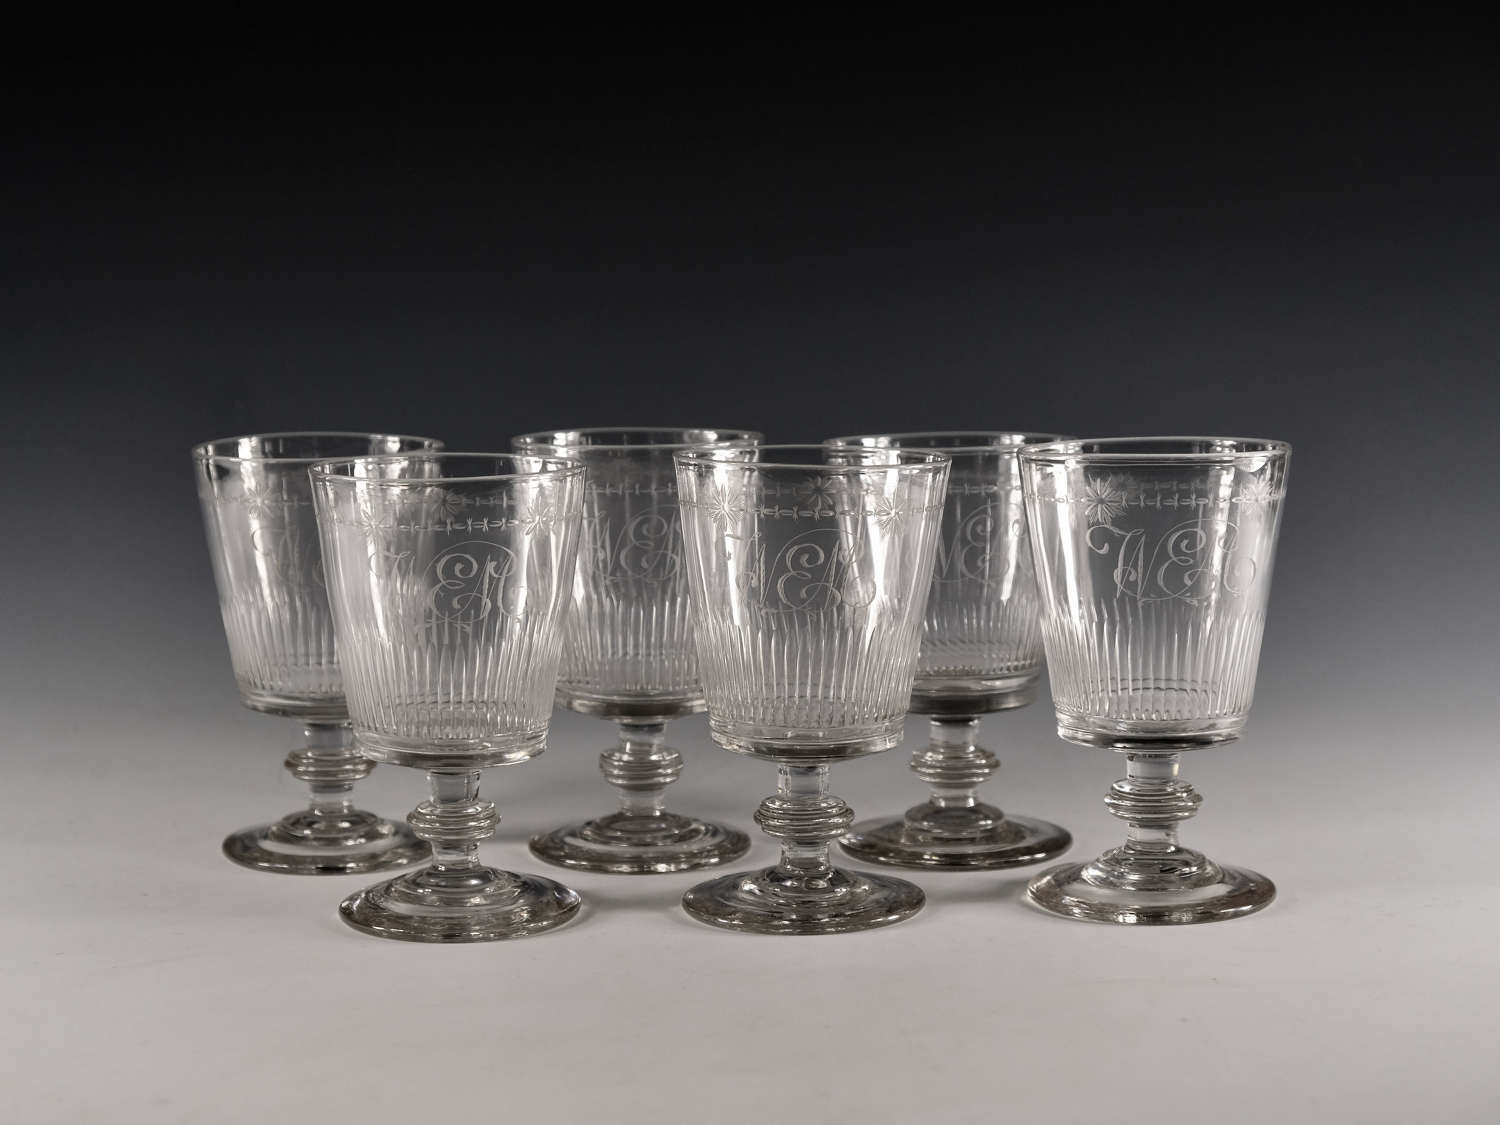 Antique glass - set of six rummers English c1820